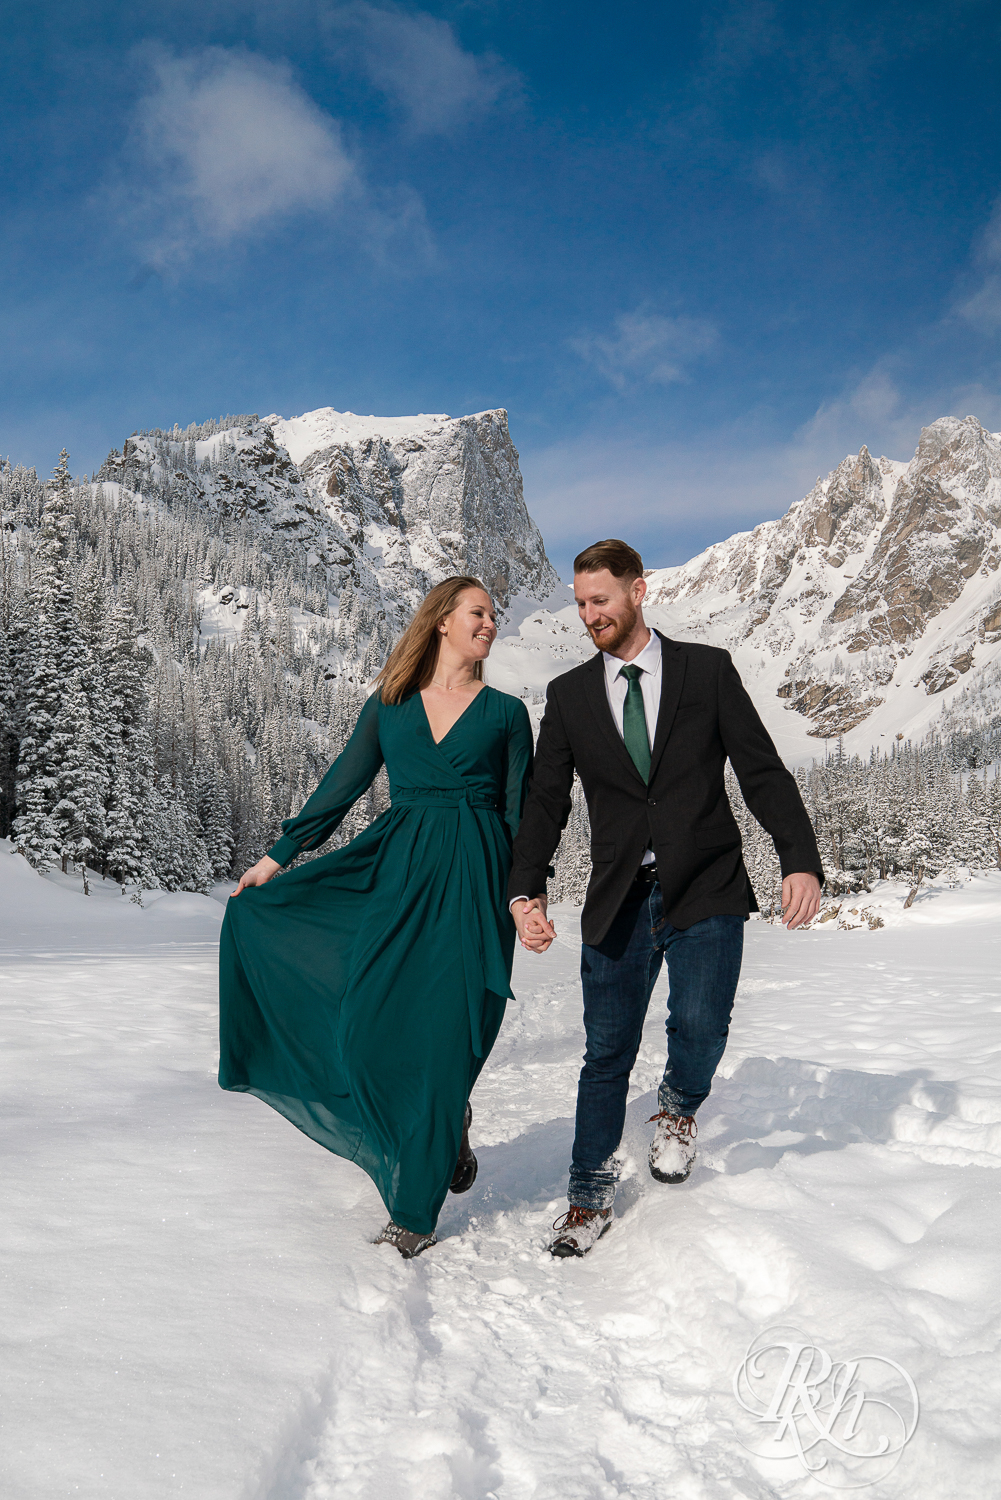 Man in suit and woman in green dress walk in snow on Dream Lake in Rocky Mountain National Park, Colorado.